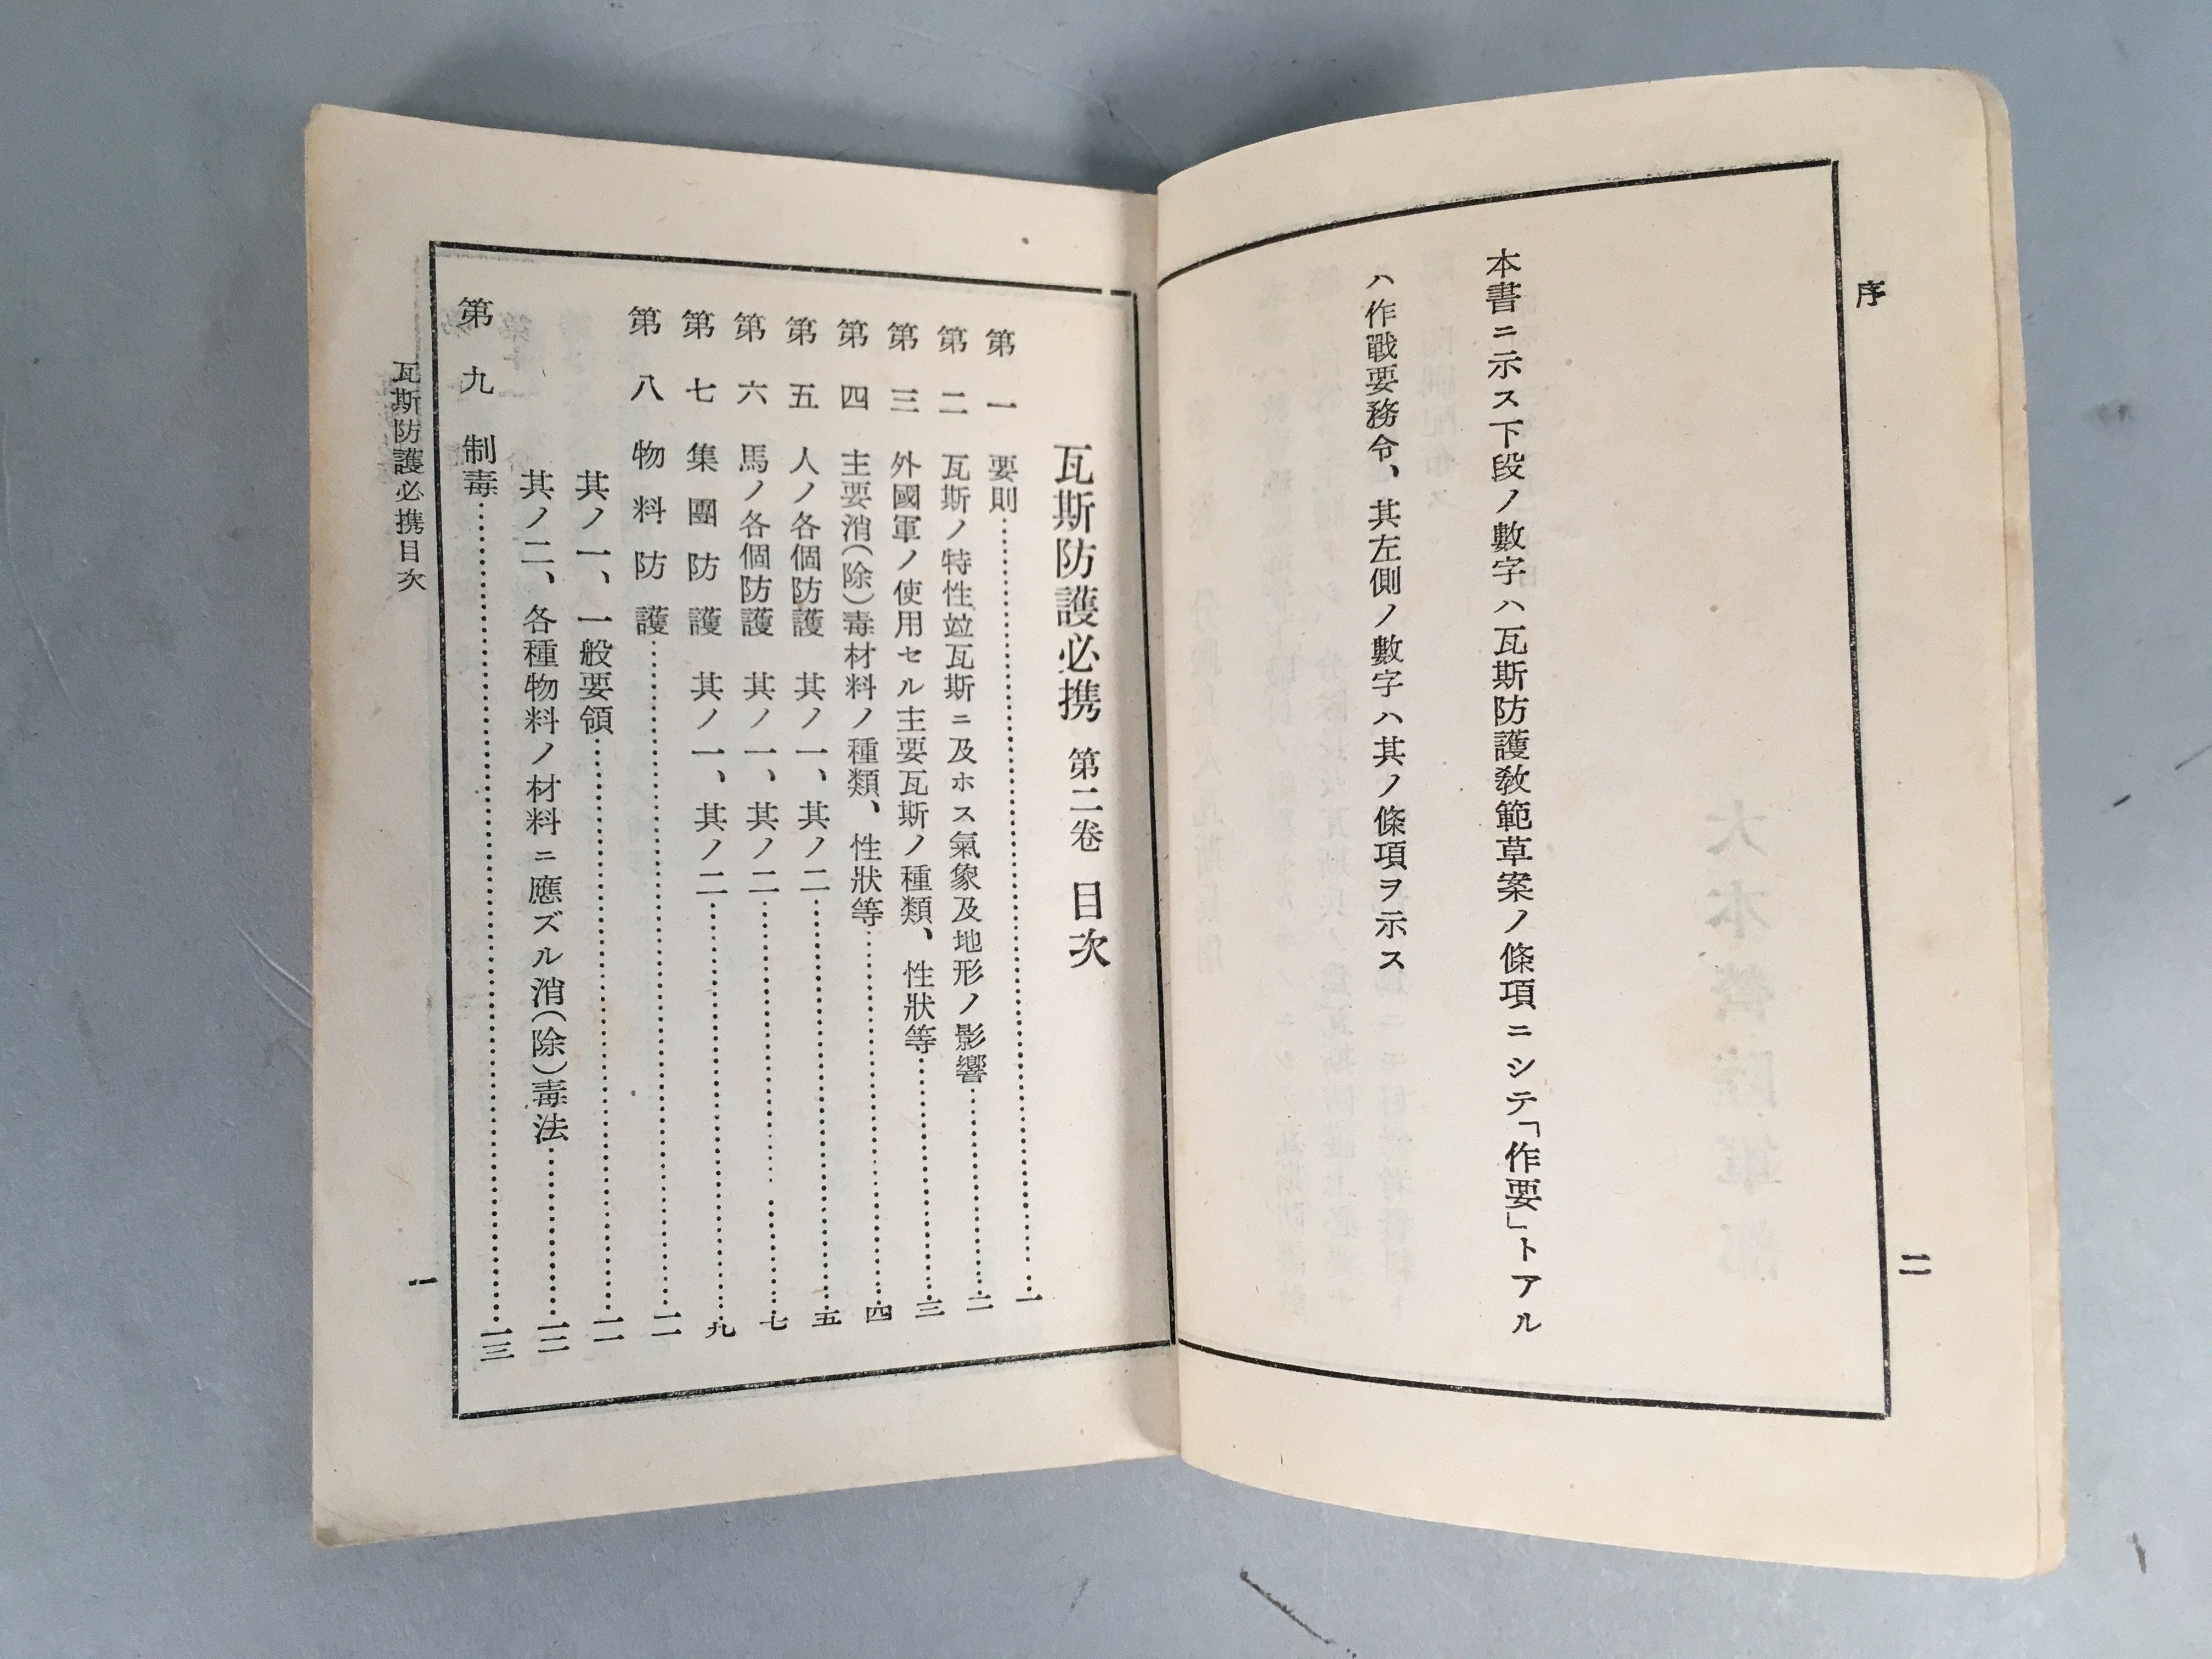 Japanese Military Book Vtg Army Second Sino-Japanese War Gas Protection JK142